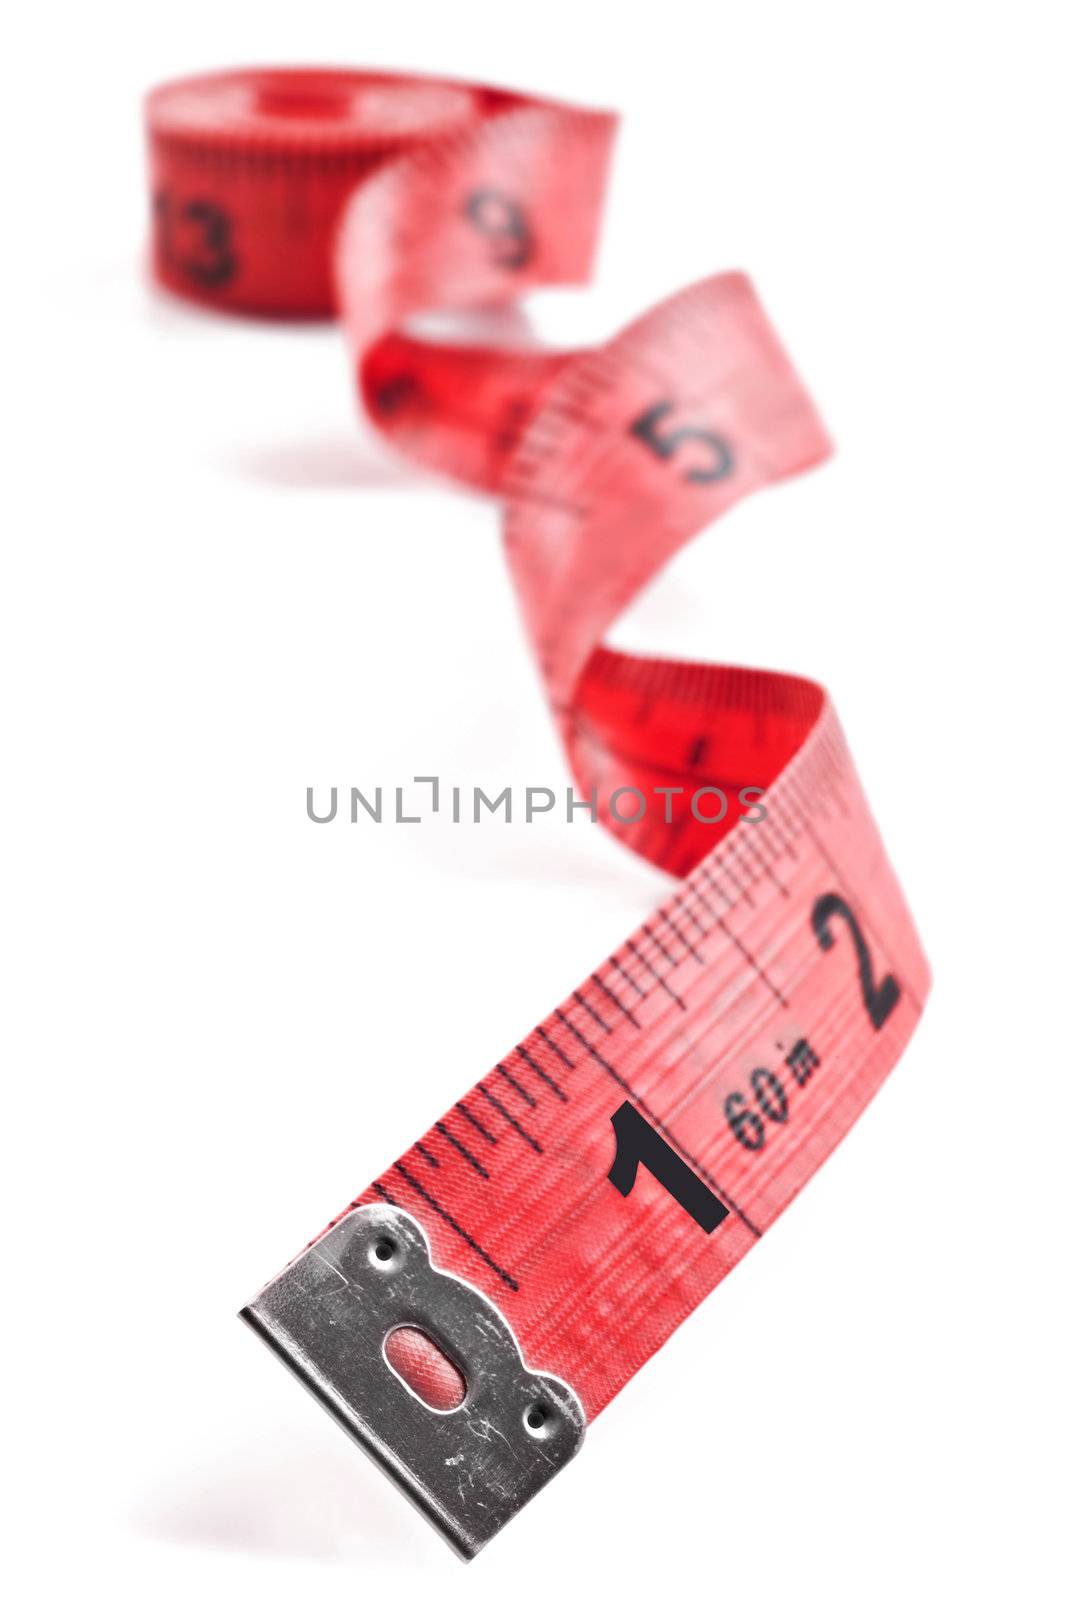 Red tape meassure on rolled up on white background by tish1